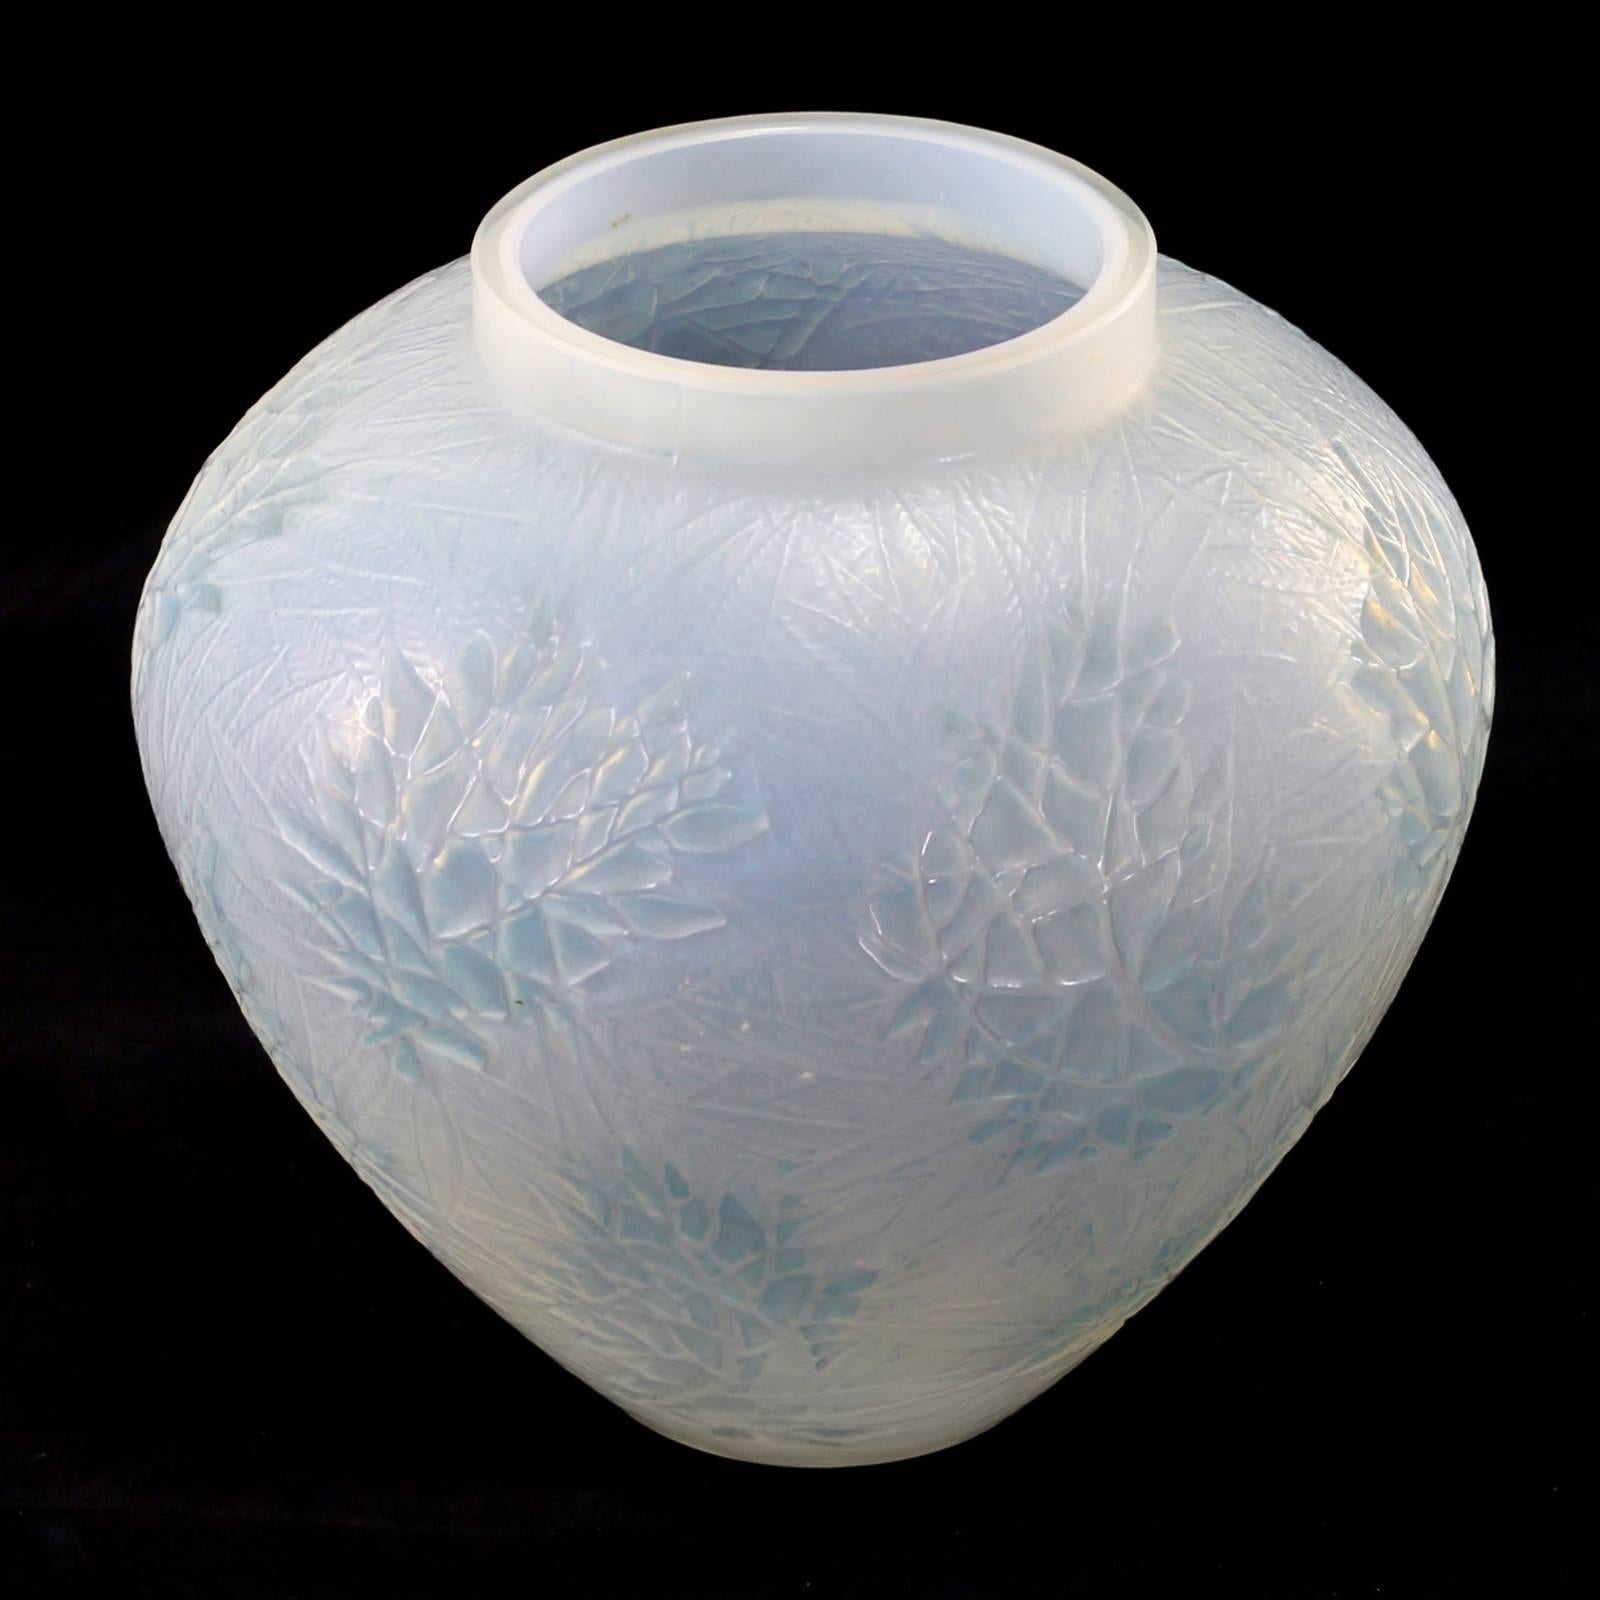 Patinated Early 20th Century Art Deco 'Esterel' Glass Vase by René Lalique